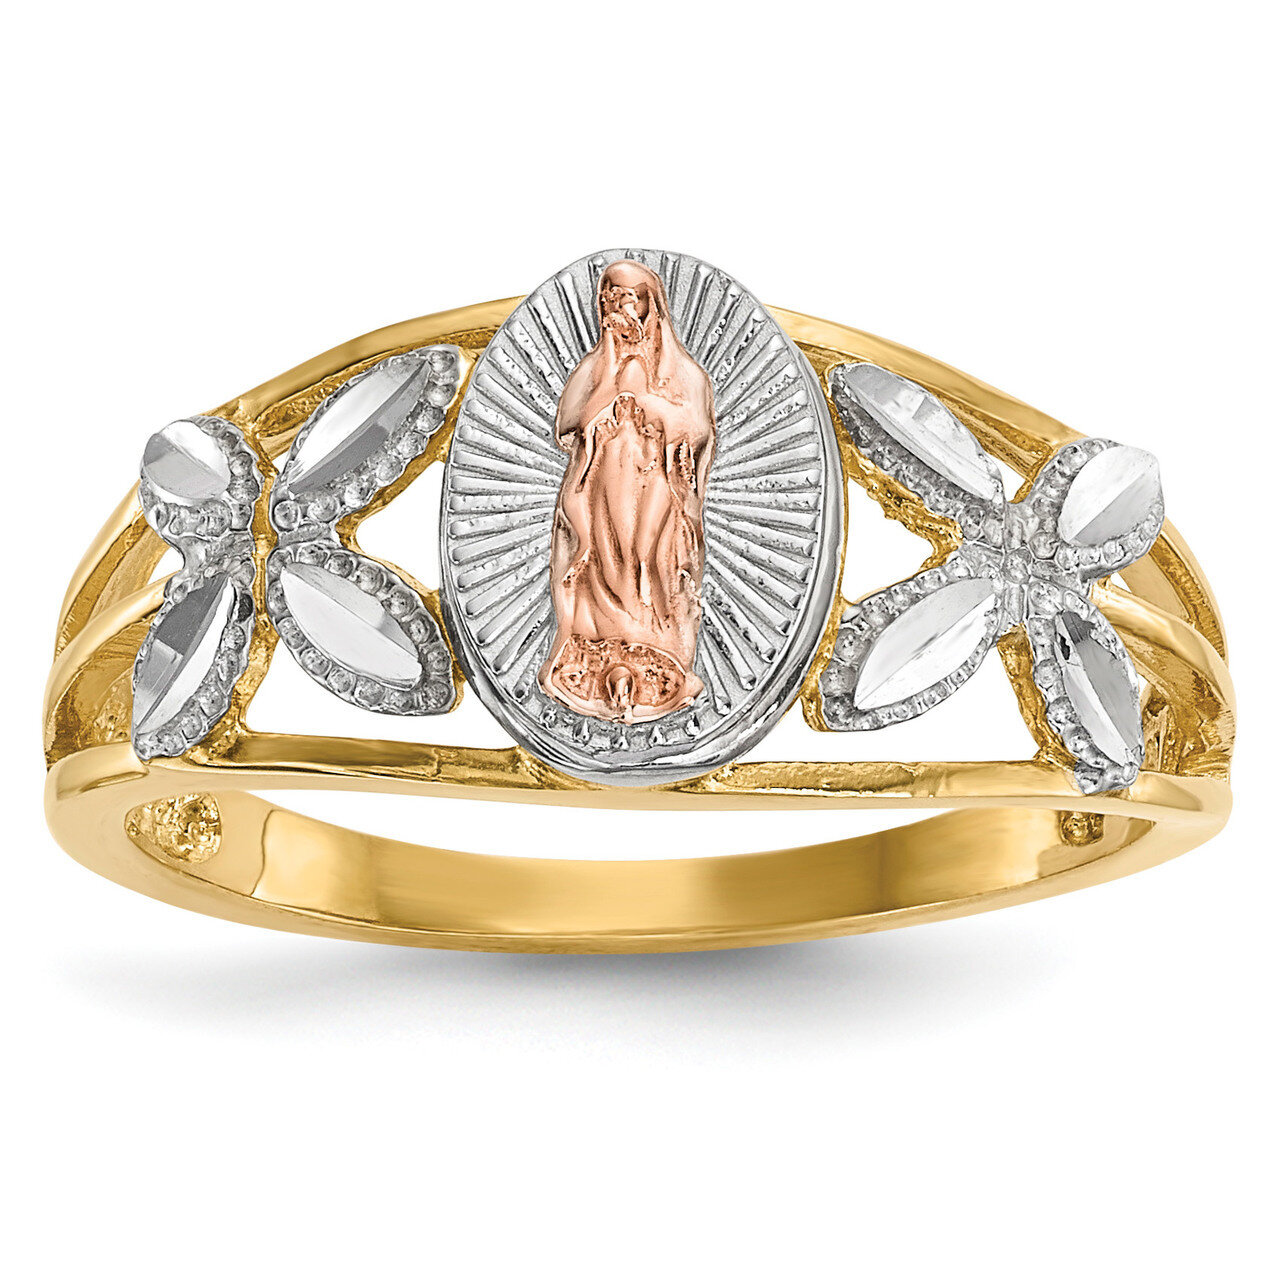 White Rhodium Polished Our Lady of Guadalupe Ring 14k Two-Tone Gold R577